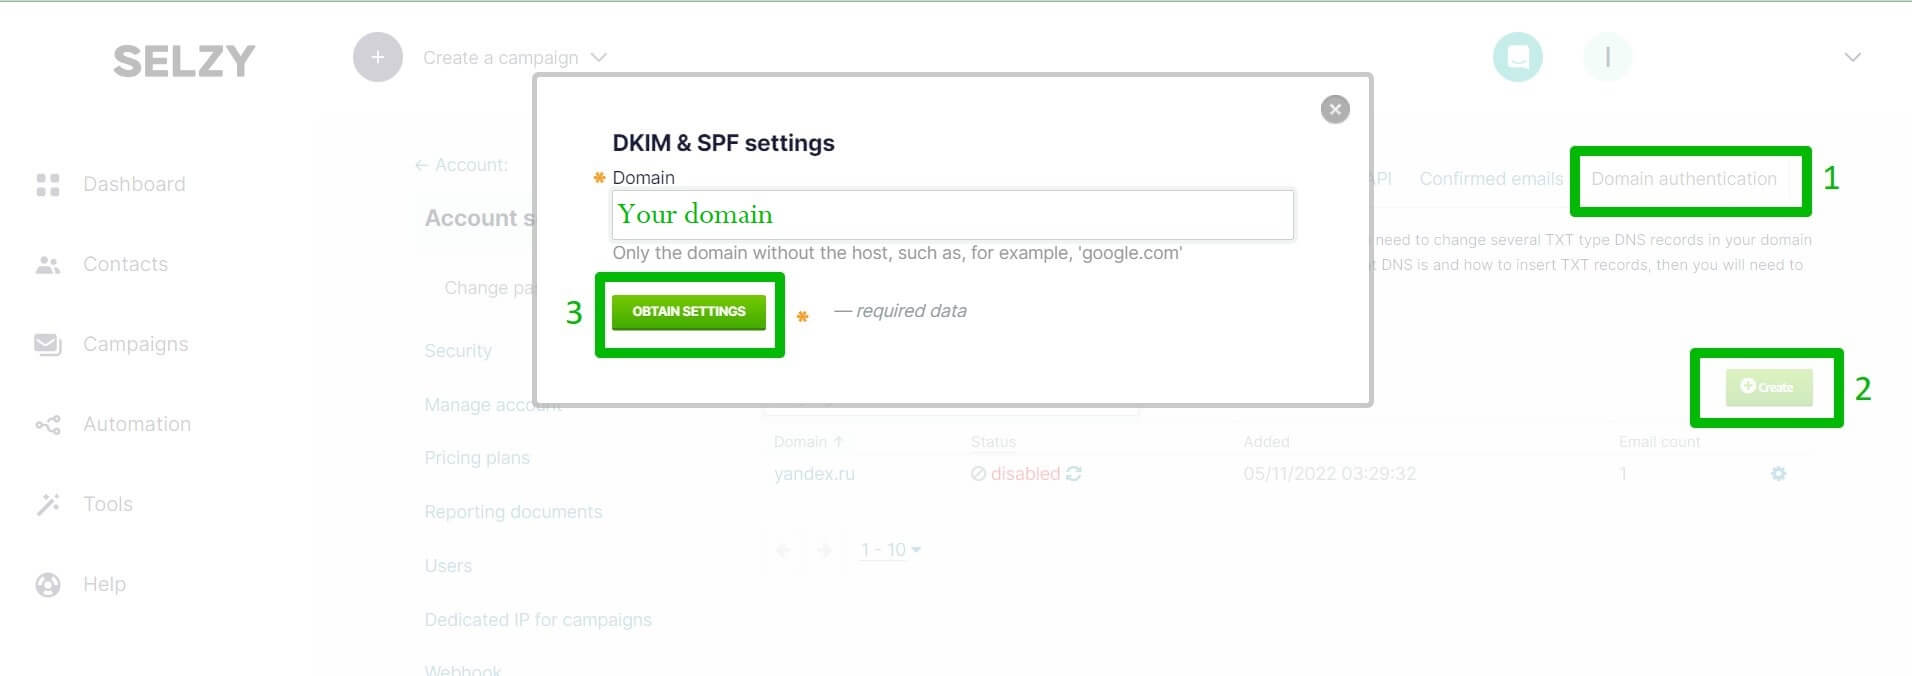 DKIM and SPF settings